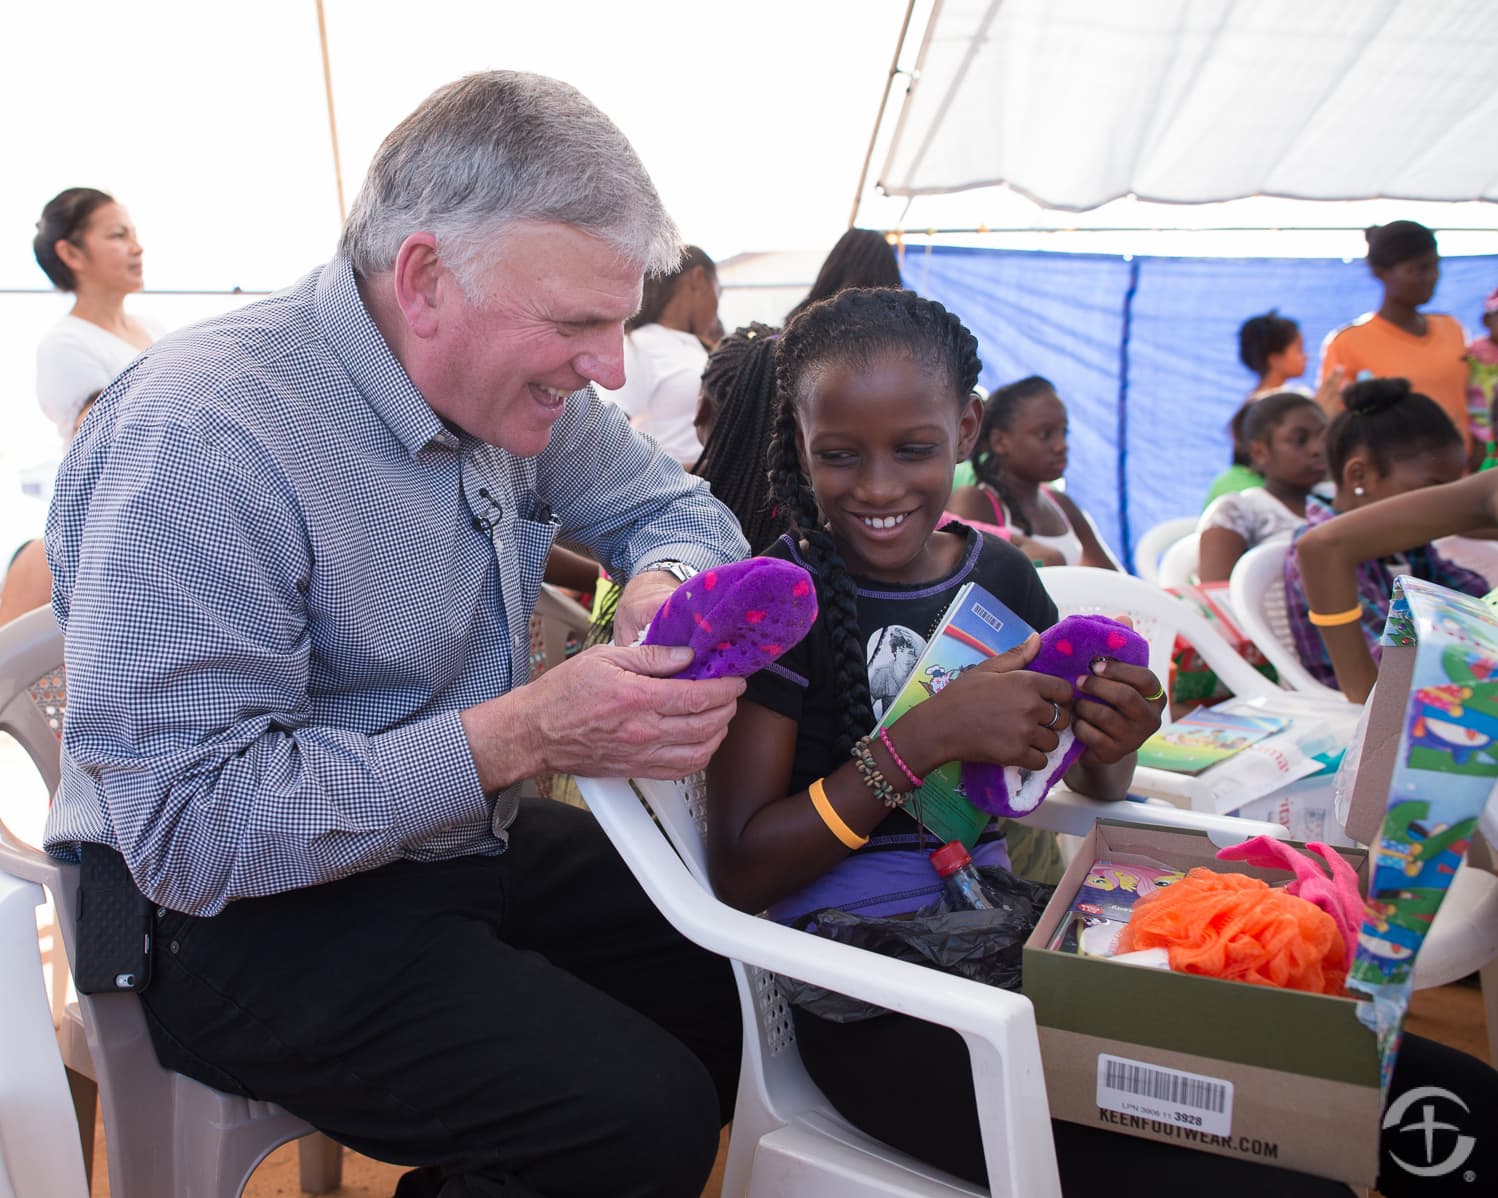 Franklin Graham watches a young girl open her shoebox. Image courtesy of Samaritan's Purse.